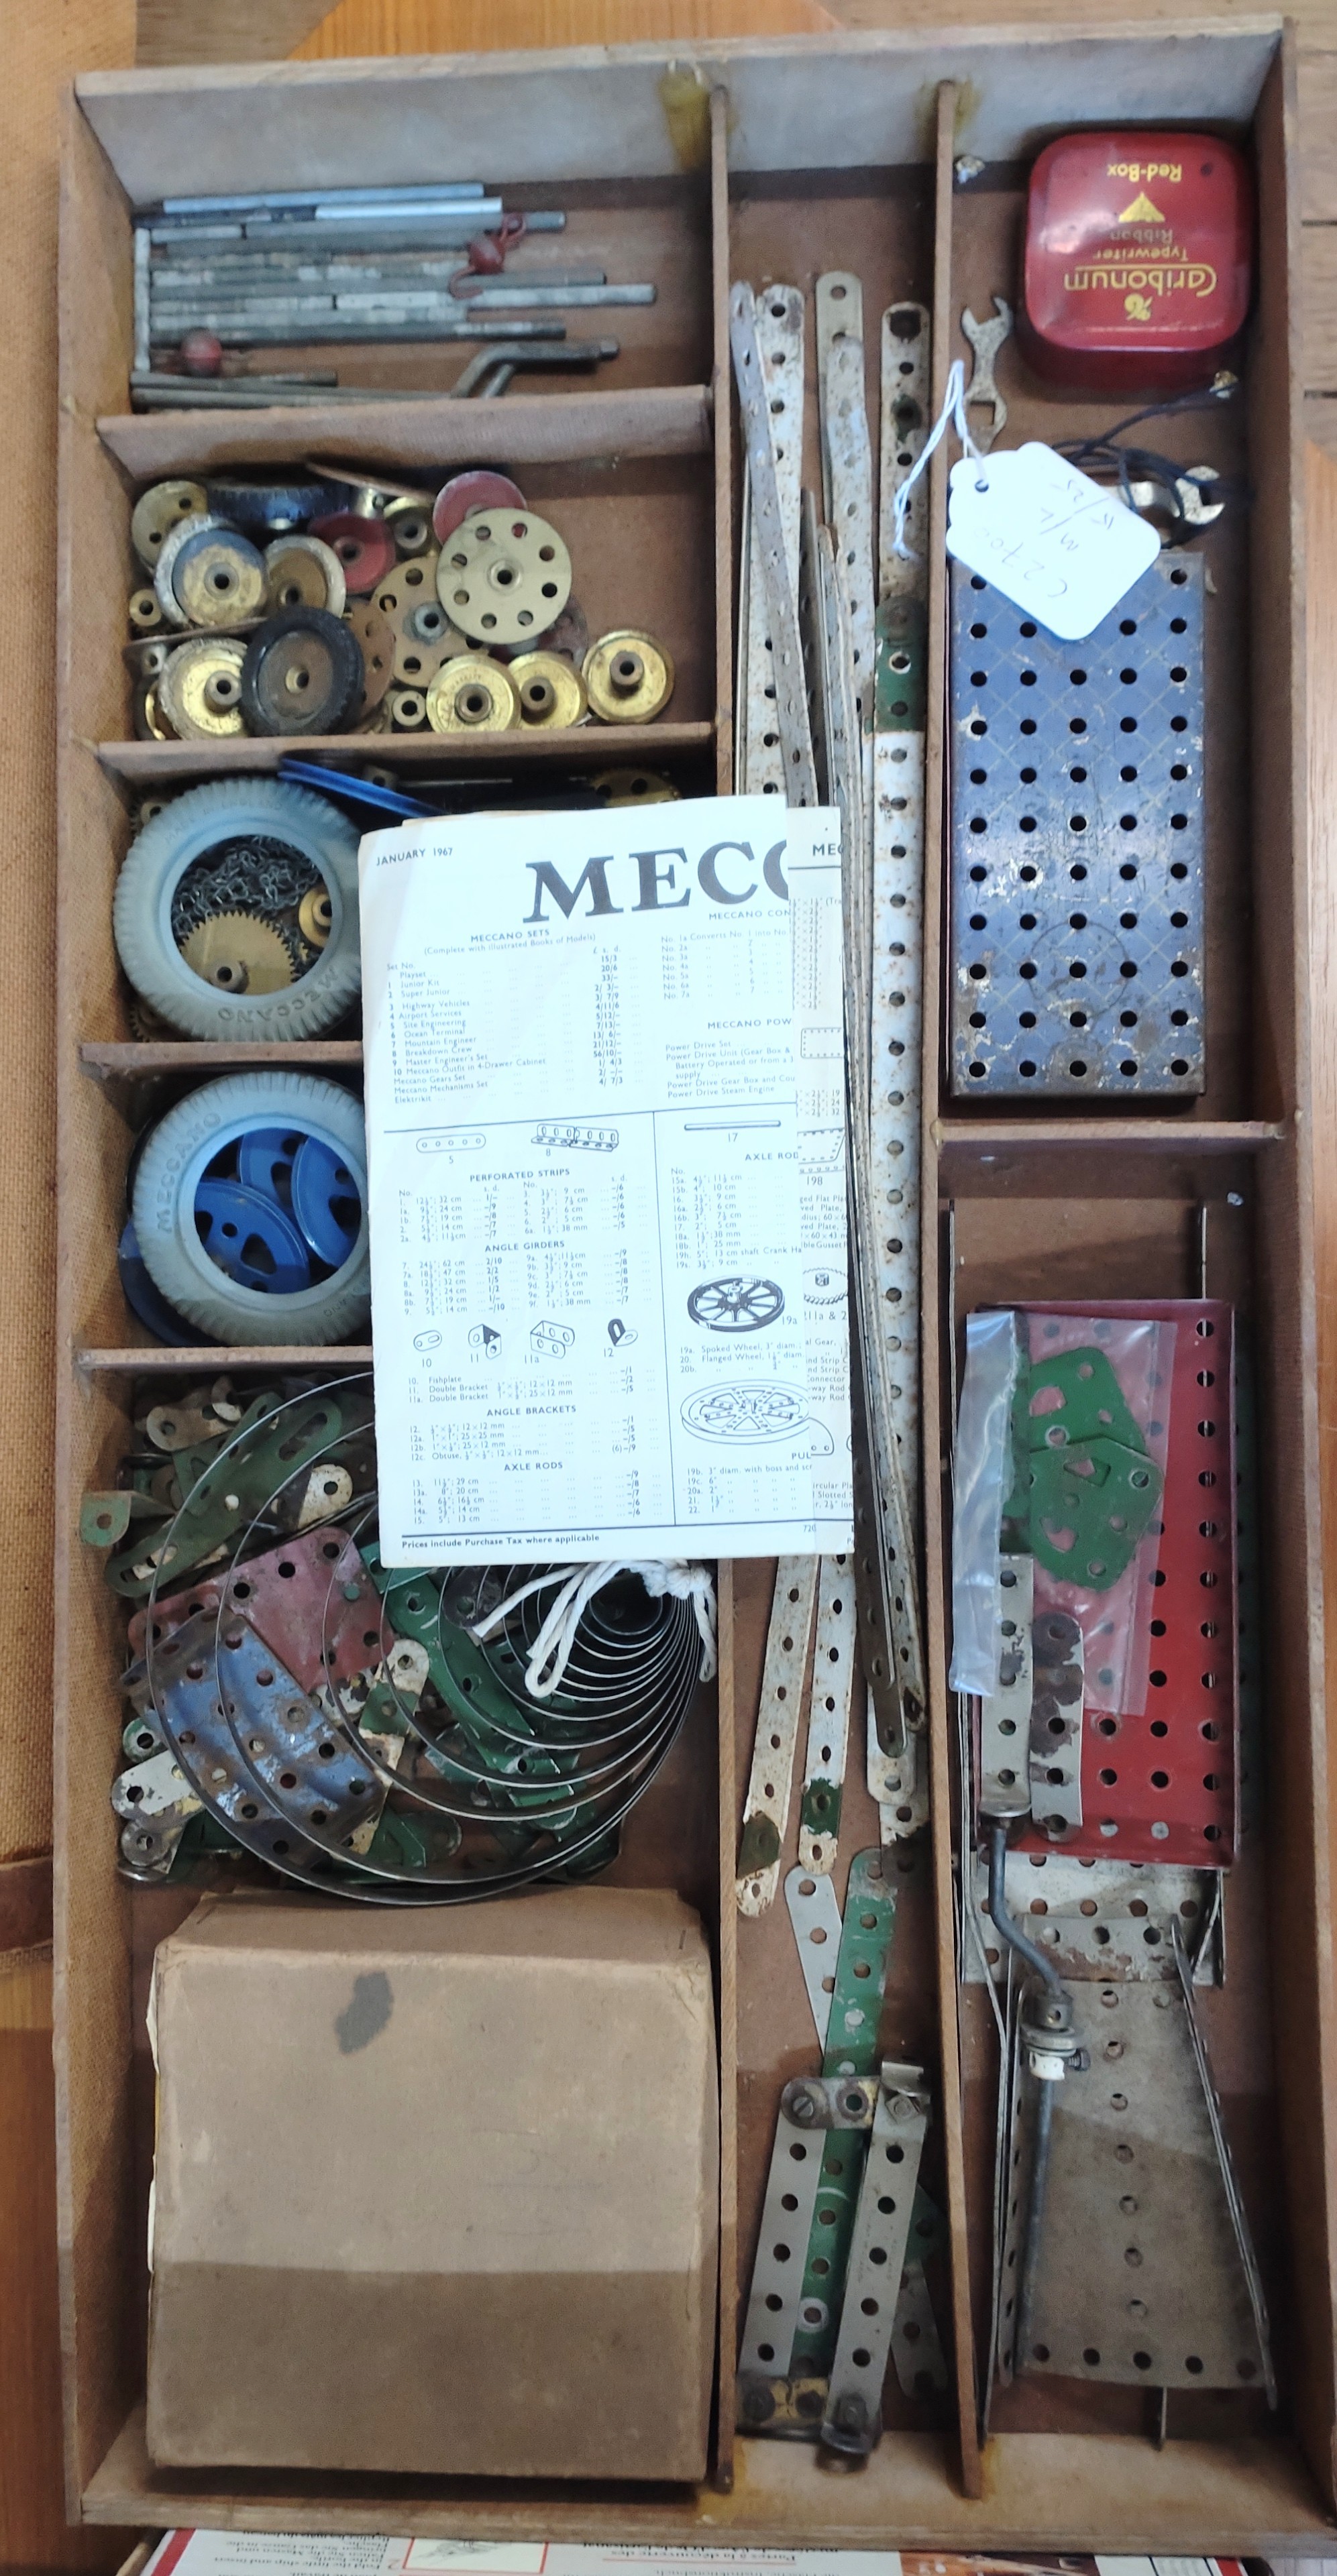 Meccano pre and post war components and wheels, two keys, a xylophone and an incomplete Ship-in a-